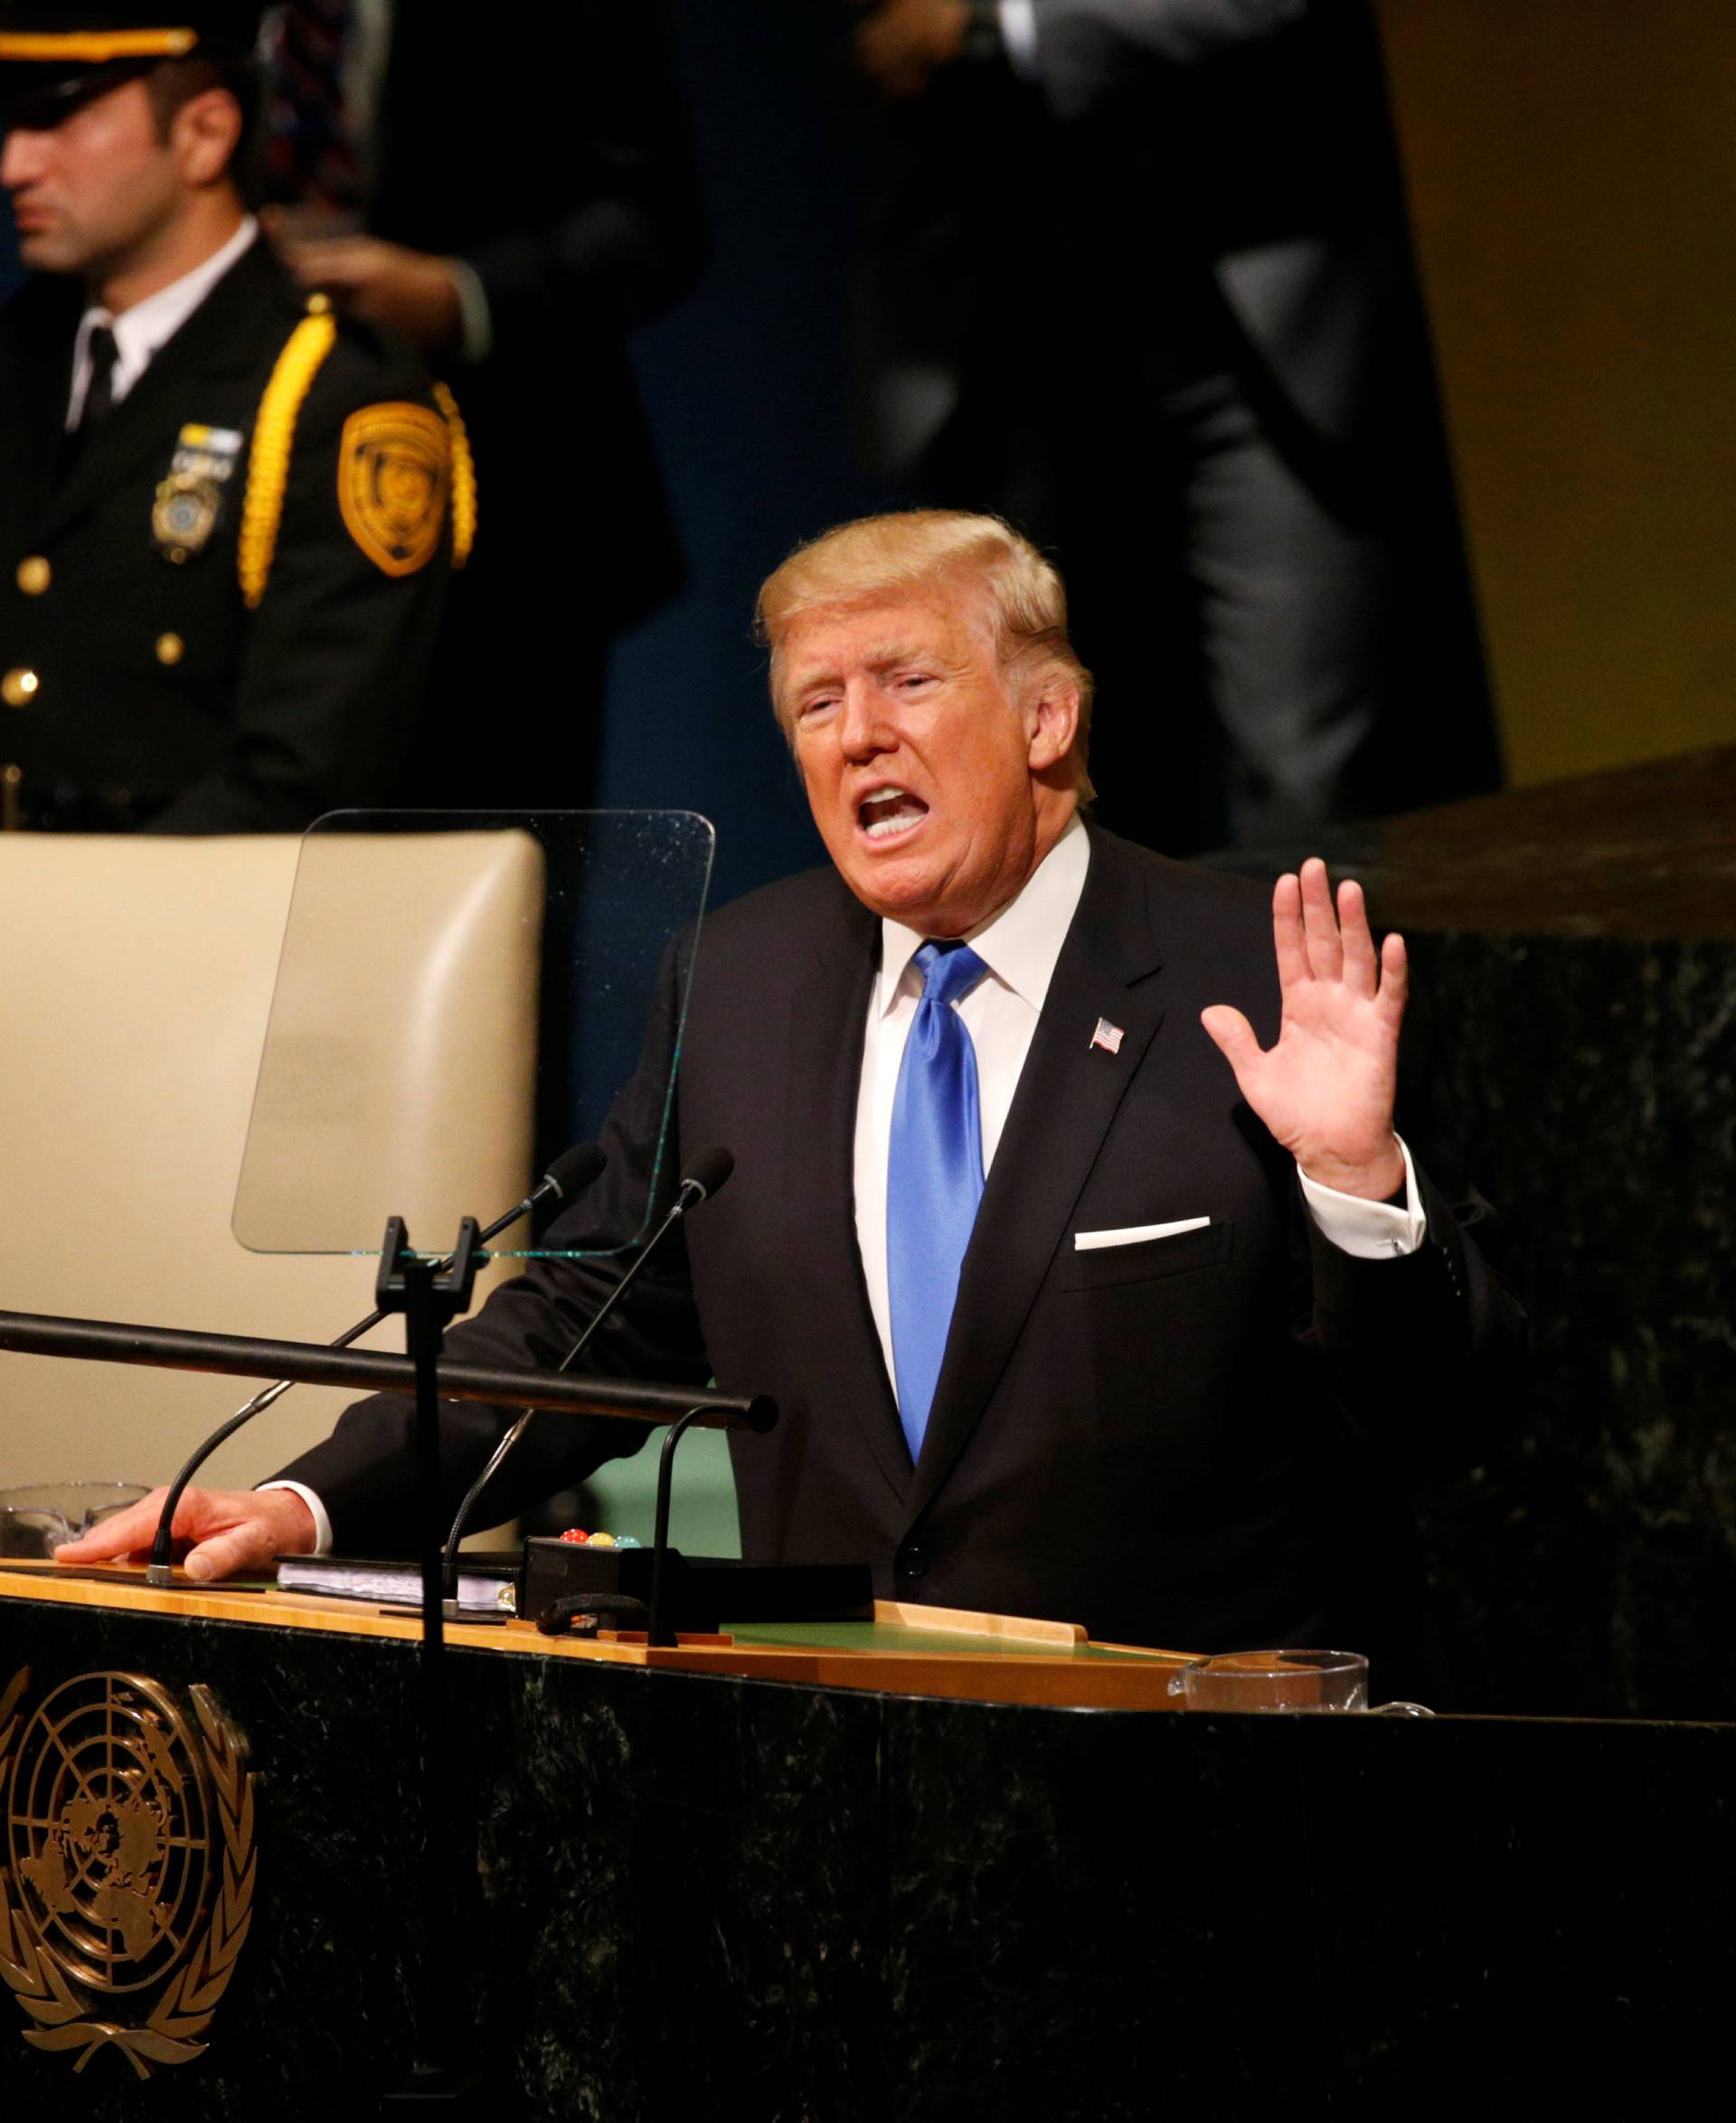 Trump addresses the United Nations in New York